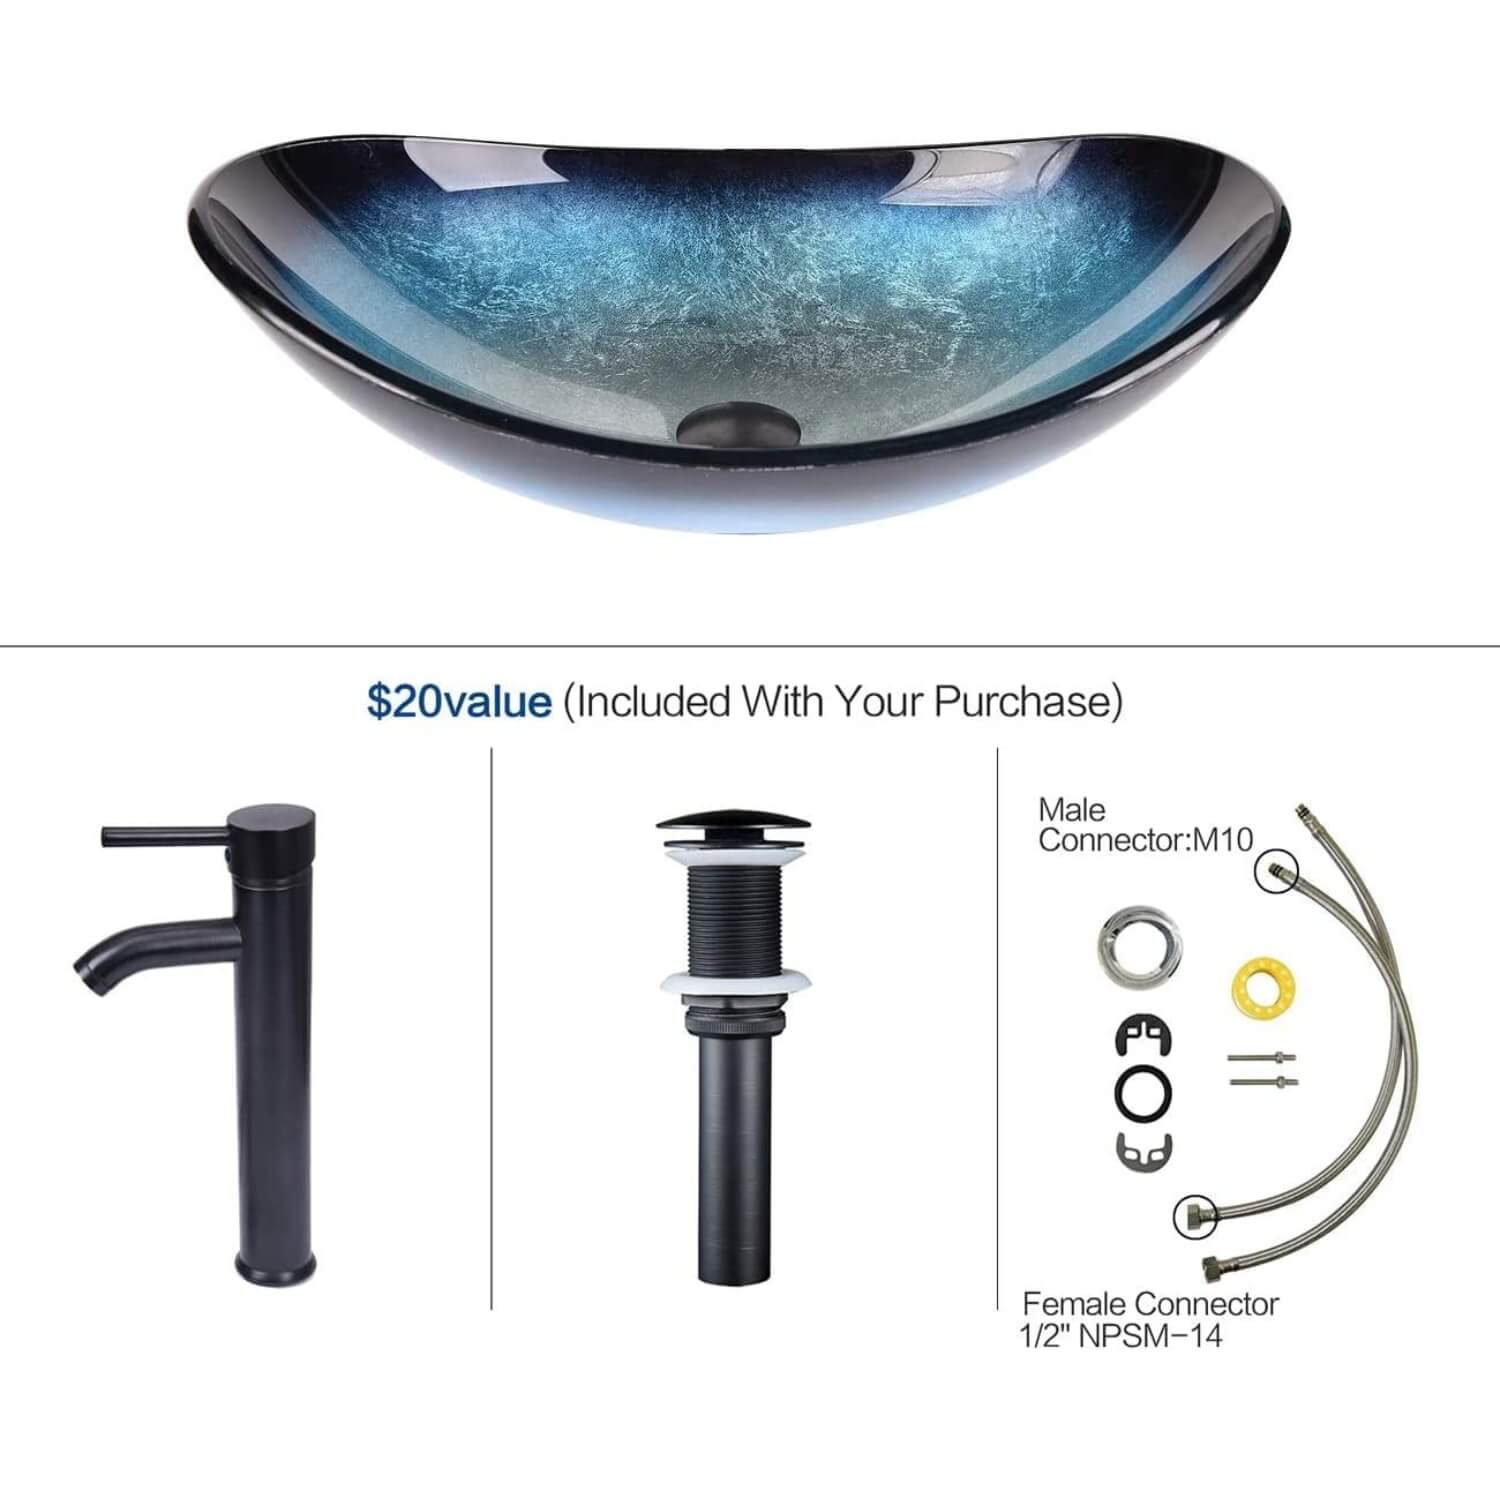 Elecwish blue boat sink included parts